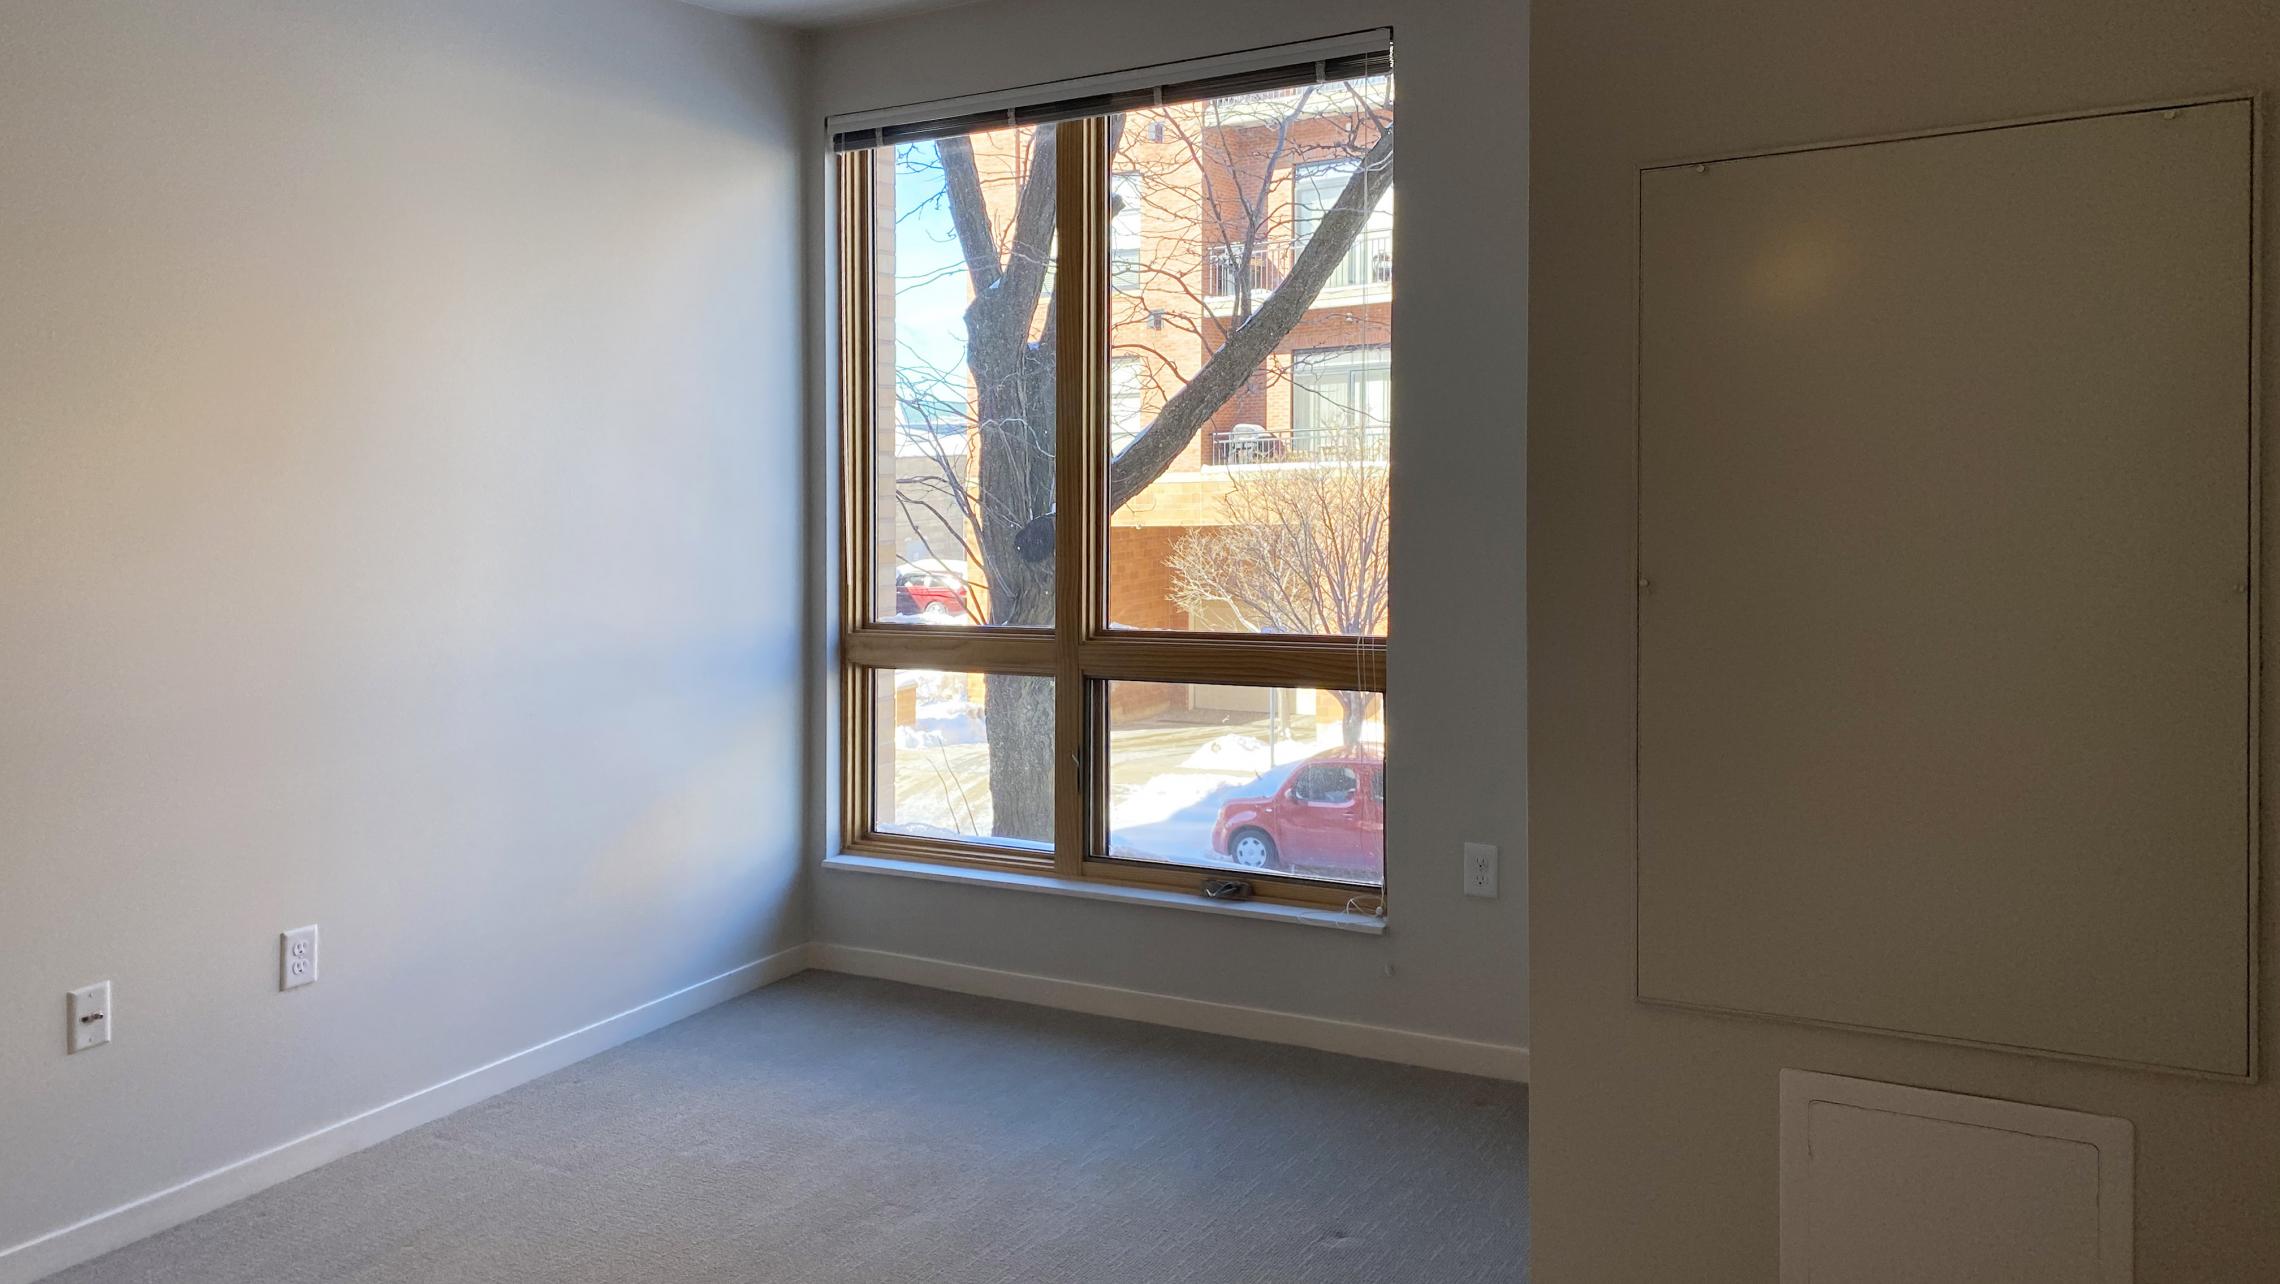 Quarter-Row-At-The-Yards-Apartment-223-One-Bedroom-Modern-Lifestyle-Cozy-Home-Lifestyle-Design-Laundry-Kitchen-Madison-Bike-Trails-Lake-Downtown-Capitol-Lounge-Gym-Courtyard-Fireplace-Grill-Bedroom-Terrace